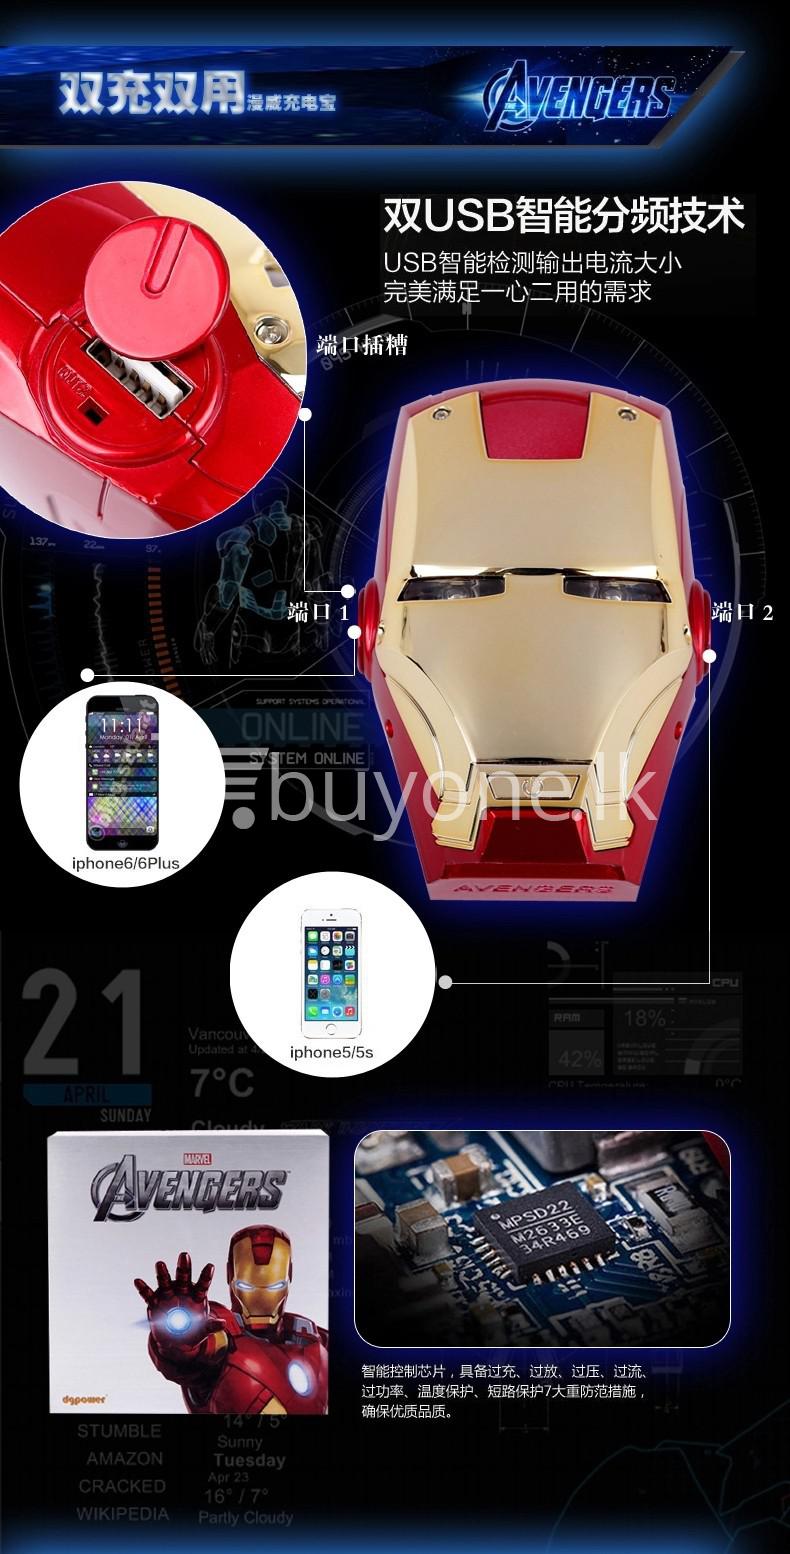 newest iron man portable power bank 6000mah for iphone samsung htc nokia oneplus mobile store special best offer buy one lk sri lanka 06543 - Newest Iron Man Portable Power Bank 6000mAh for iPhone, Samsung, HTC, Nokia, OnePlus